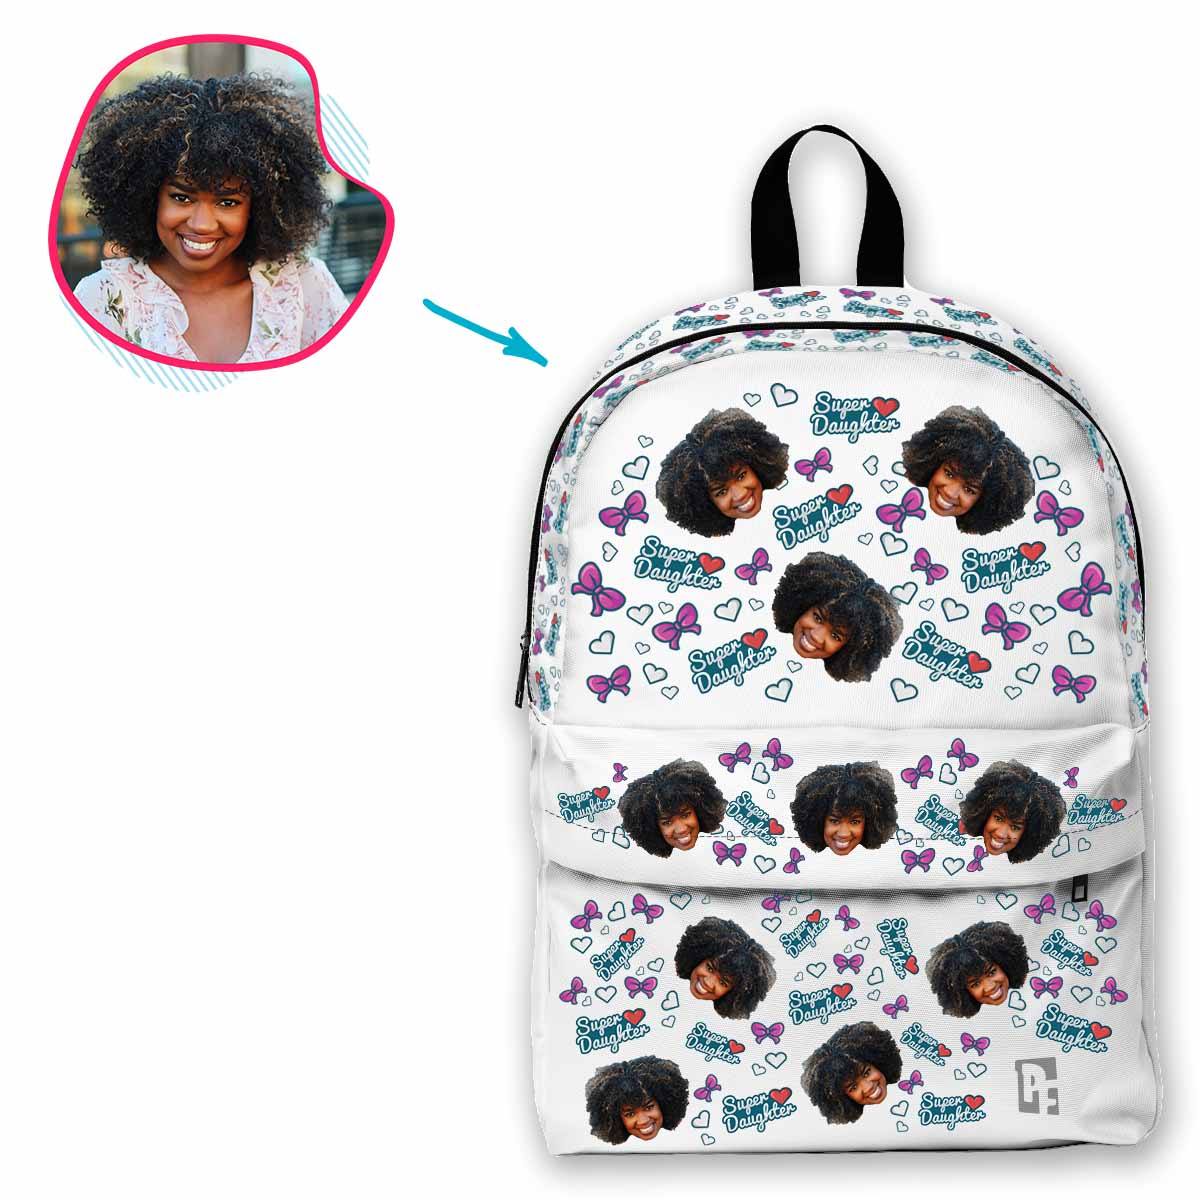 white Super Daughter classic backpack personalized with photo of face printed on it